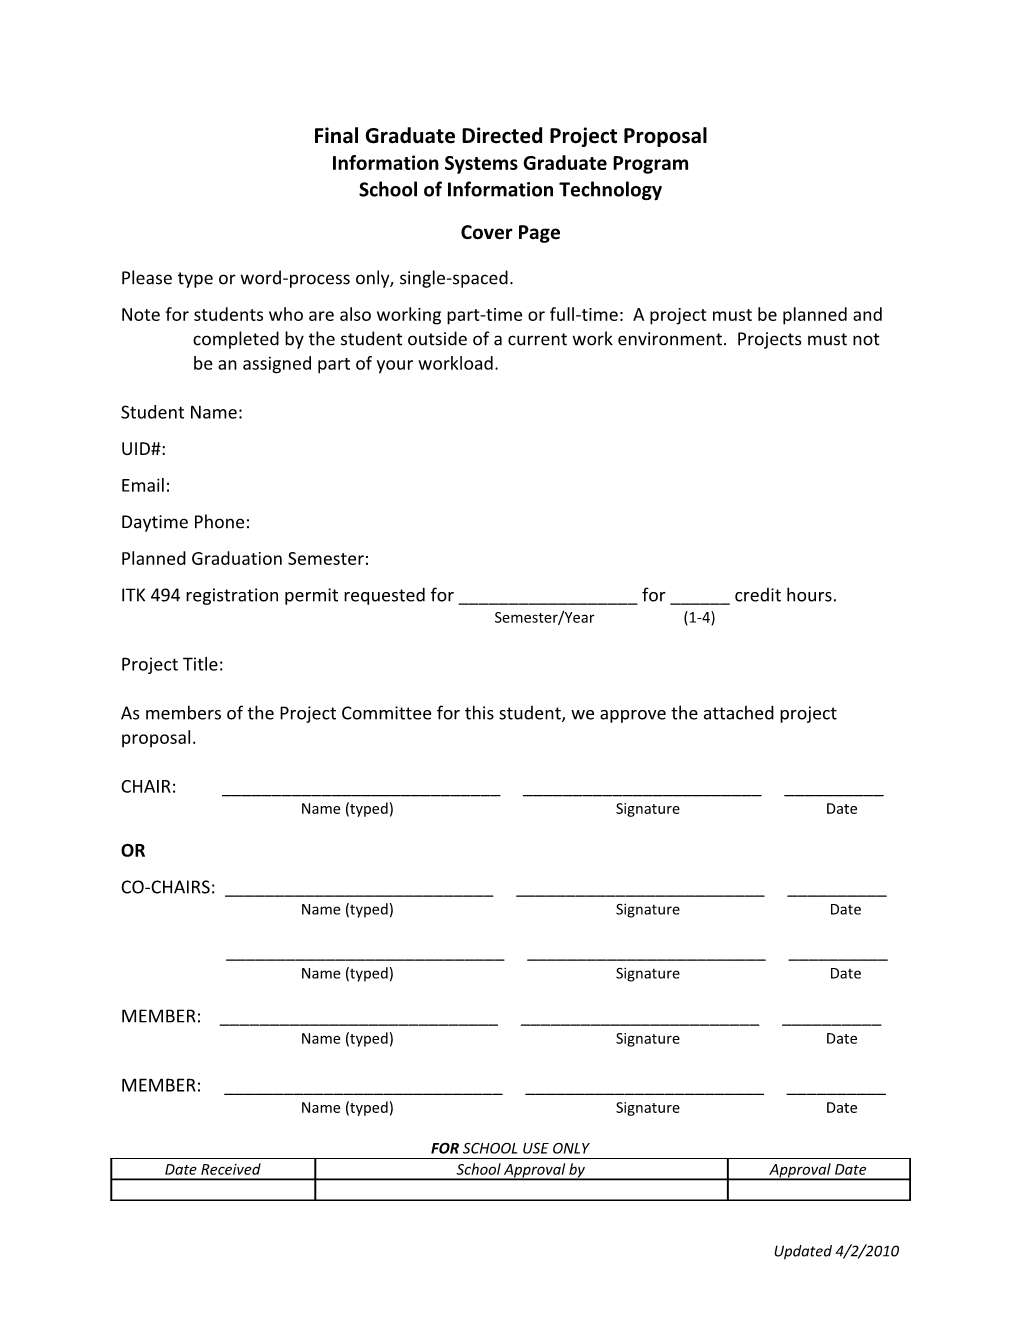 Remove This Page of Directions When Submitting Proposal